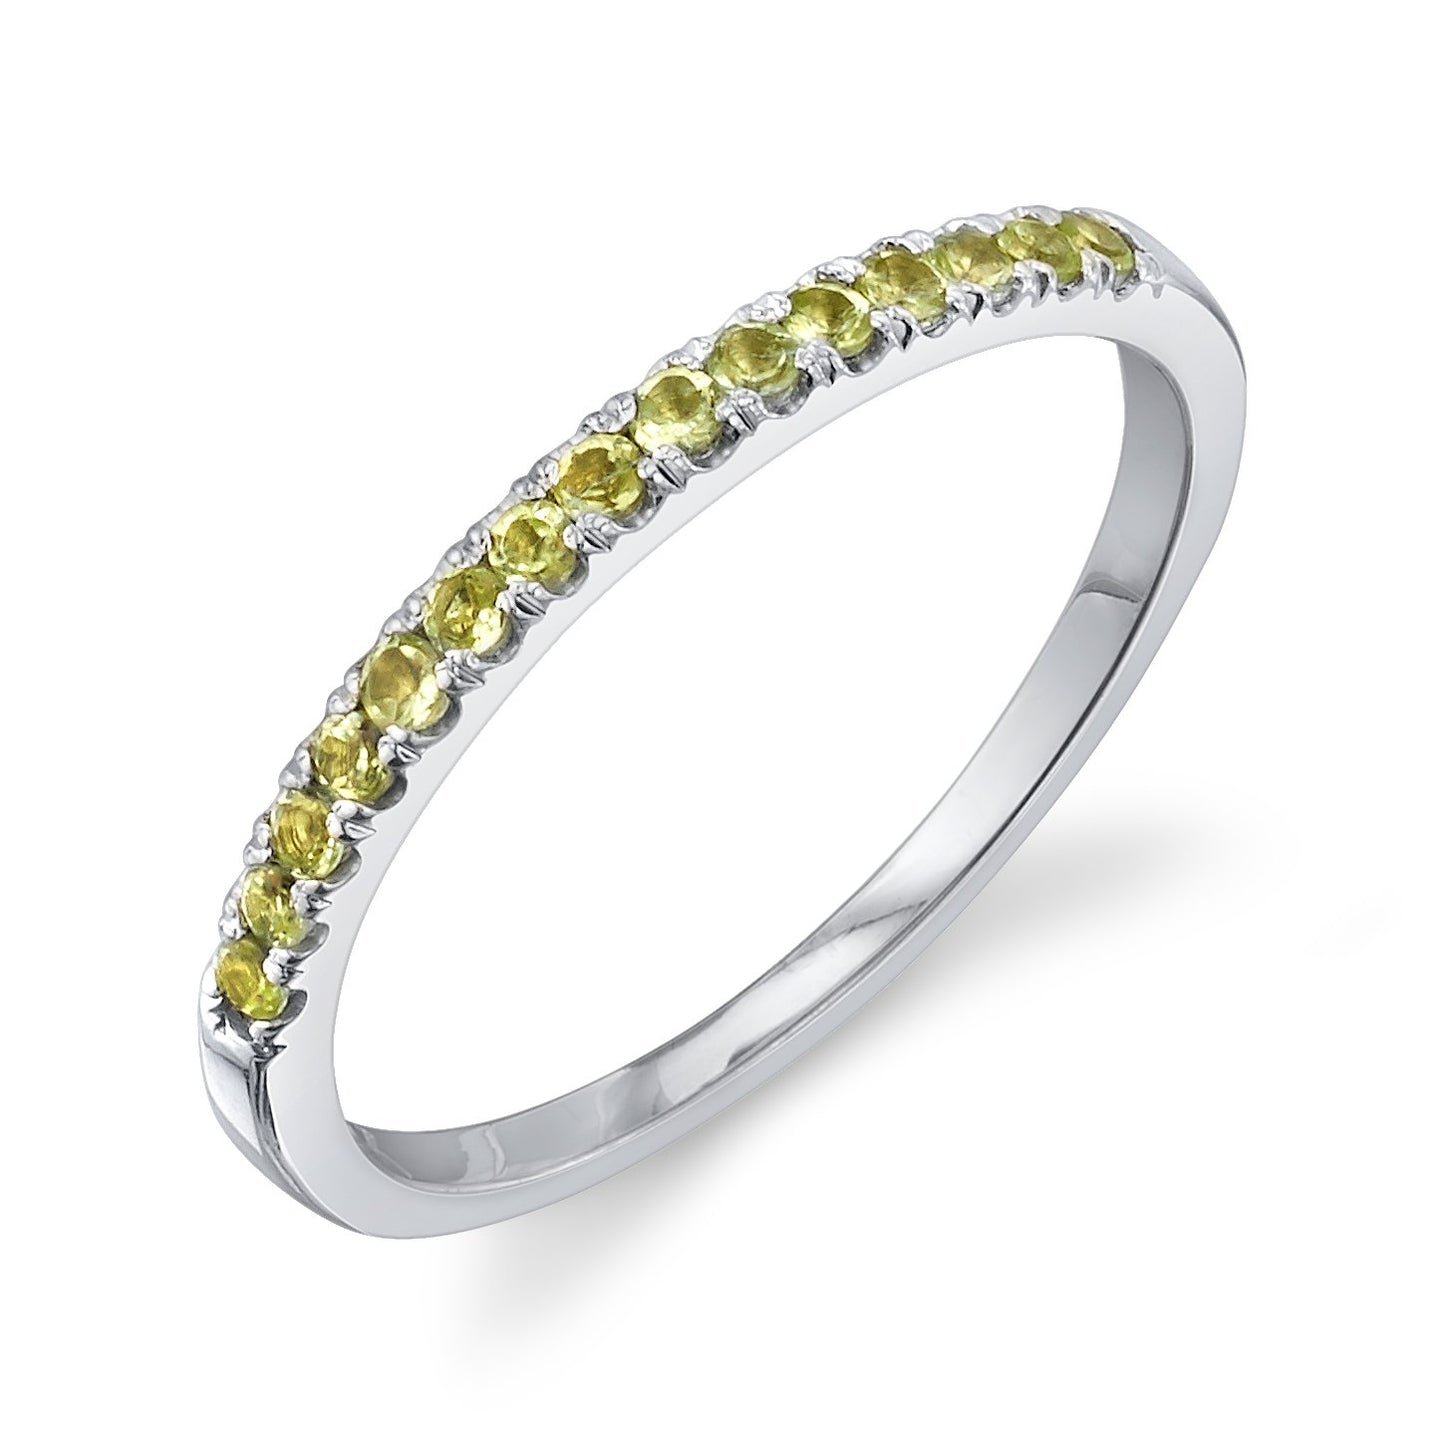 Colette Large Pave Ring Peridot / 14K White Gold